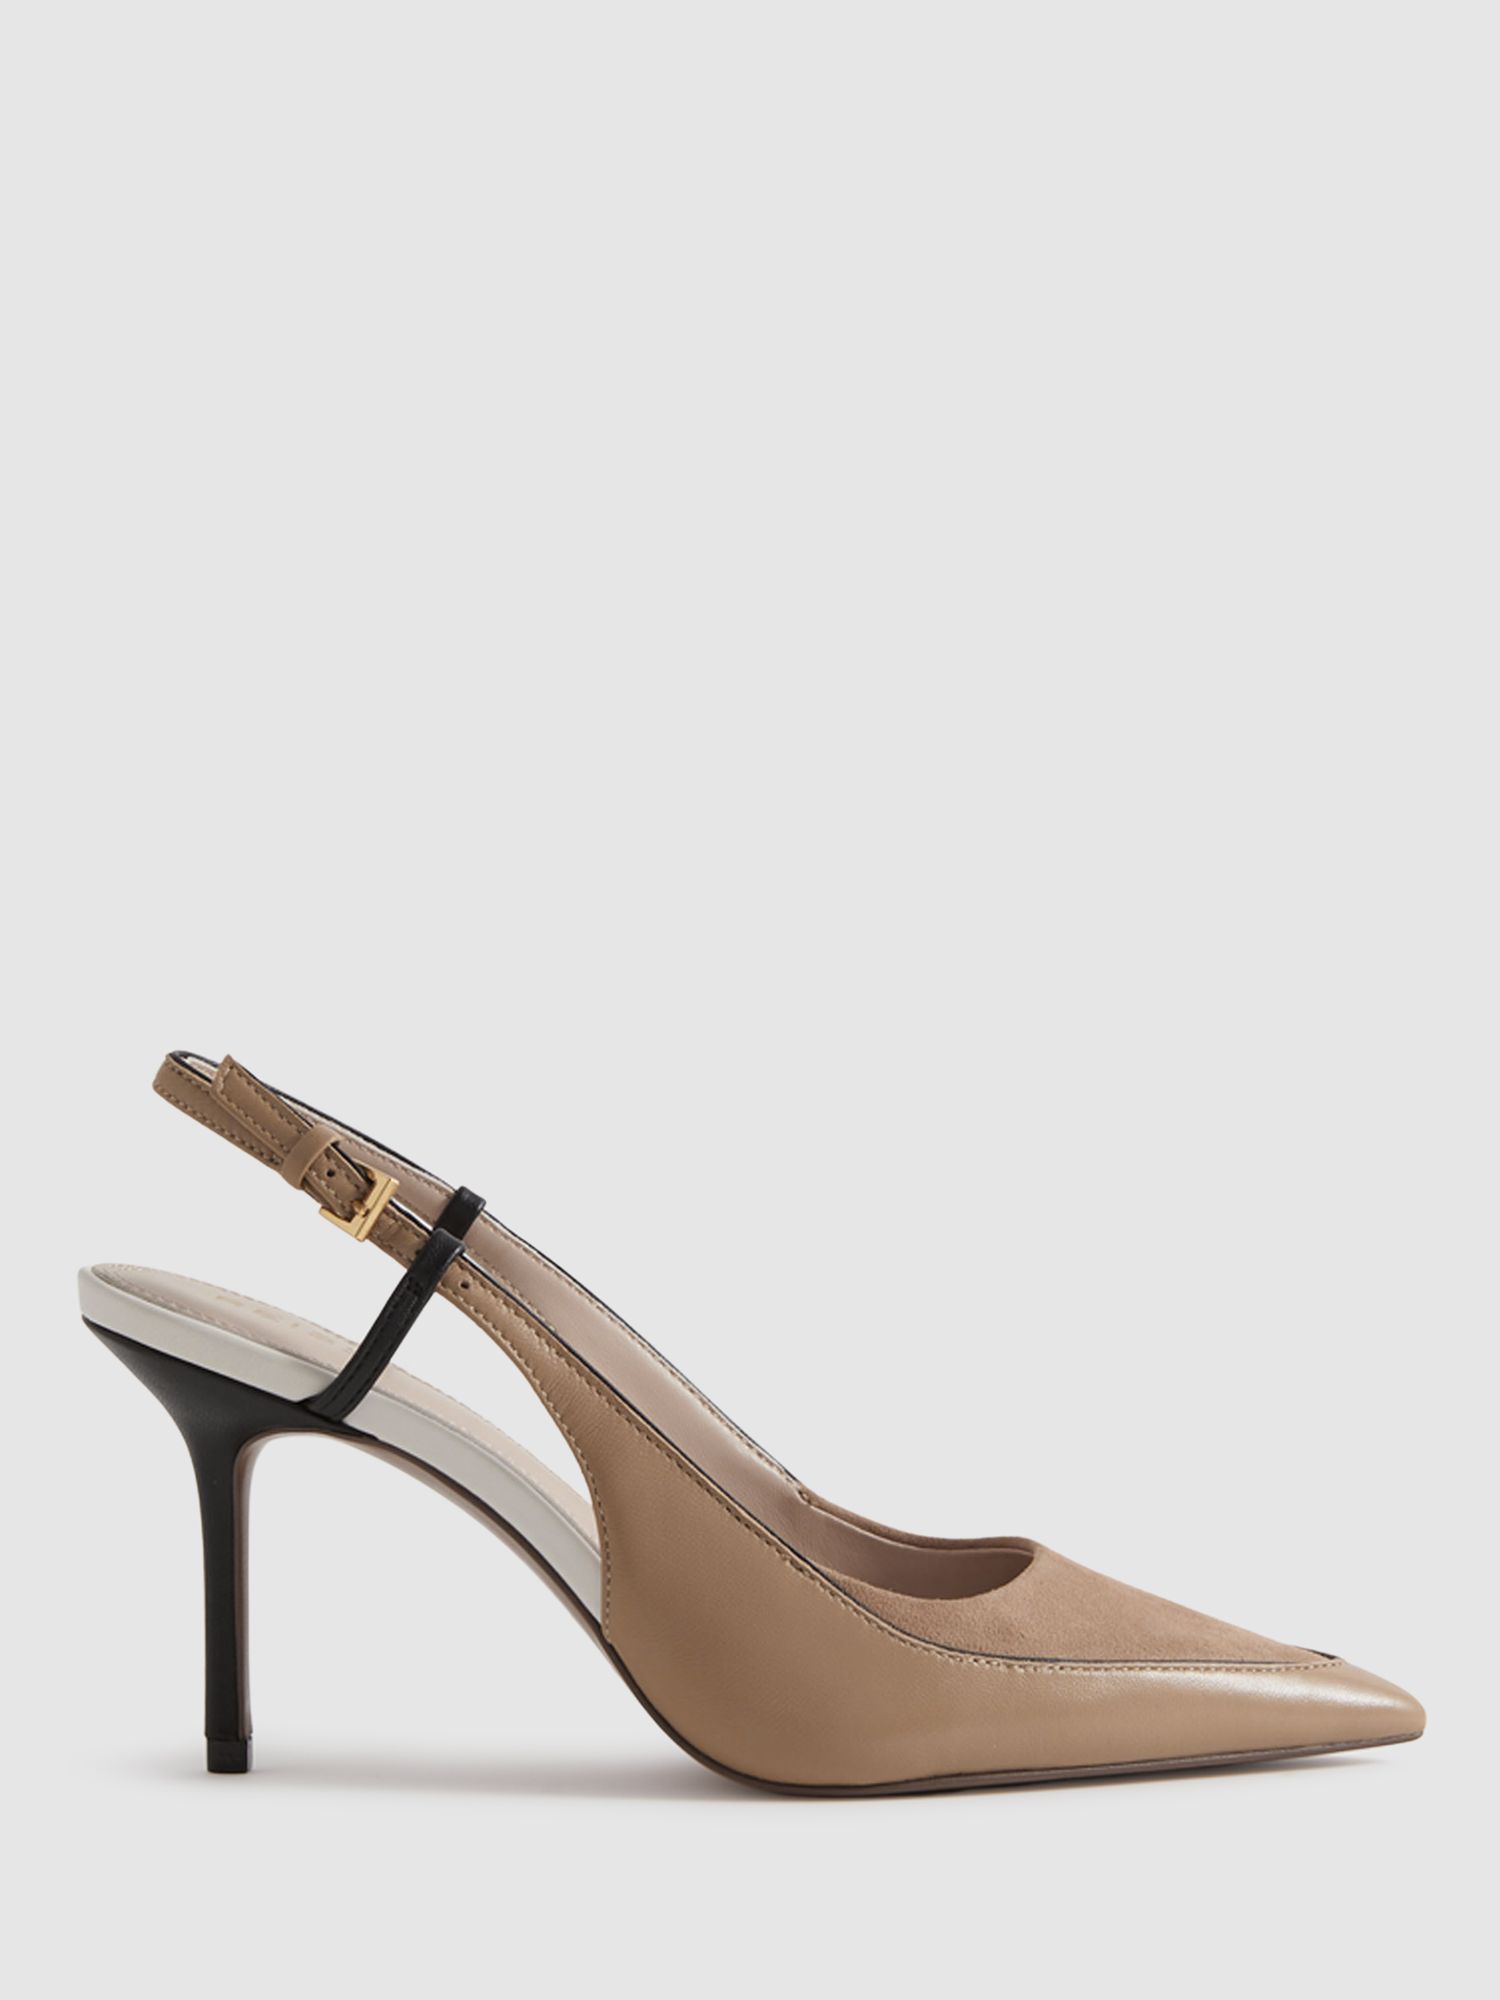 Reiss Leena Leather and Suede High Heel Court Shoes, Nude, 4